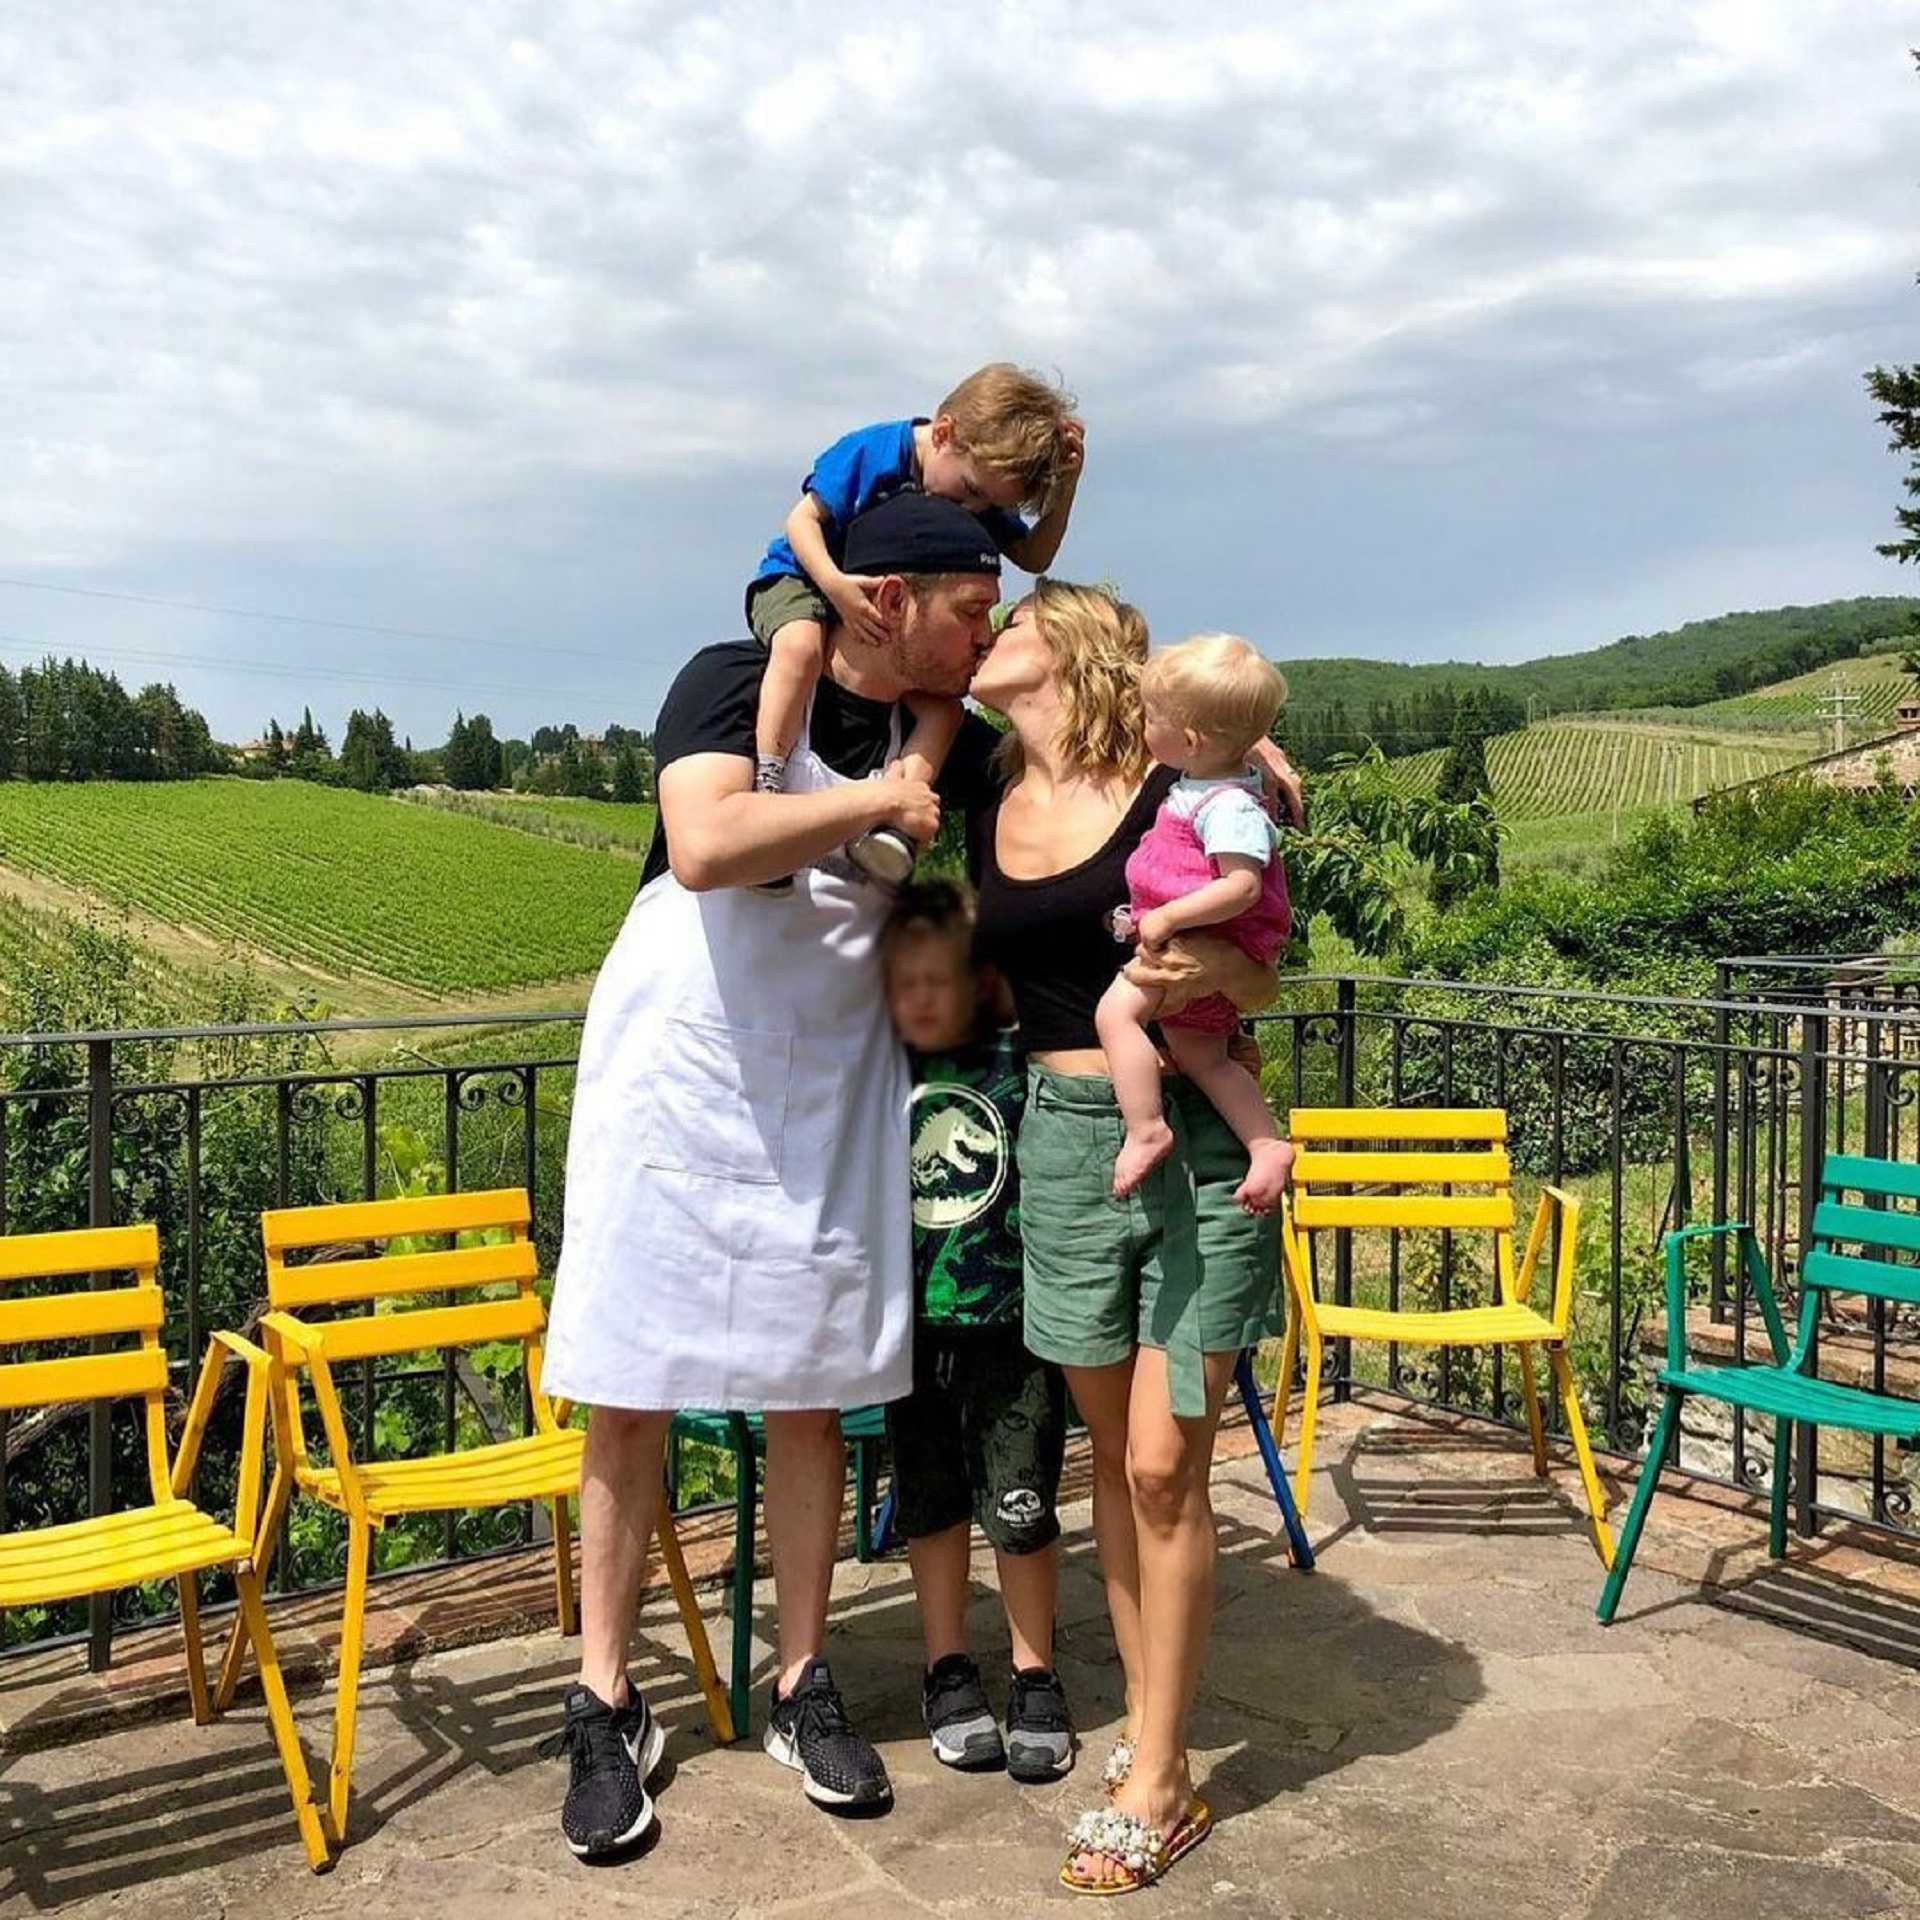 The romantic family photo: Noah in the middle of Luisana Lopilato, who is holding Vida and Michael Bublé, with Elías on his shoulders